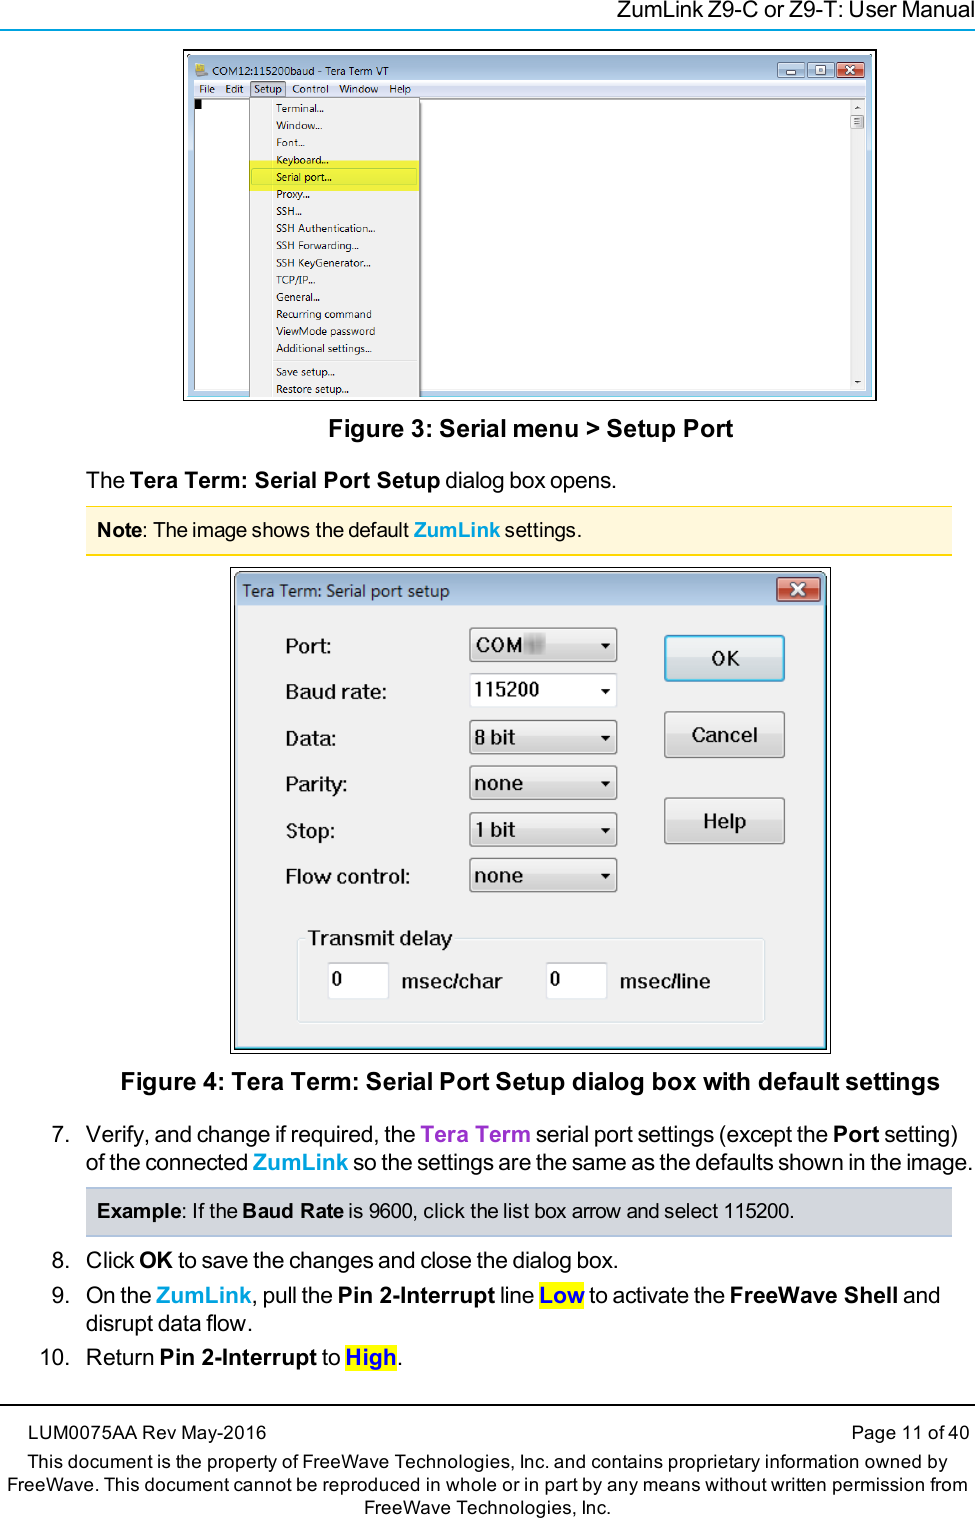 ZumLink Z9-C or Z9-T: User ManualFigure 3: Serial menu &gt; Setup PortThe Tera Term: Serial Port Setup dialog box opens.Note: The image shows the default ZumLink settings.Figure 4: Tera Term: Serial Port Setup dialog box with default settings7. Verify, and change if required, the Tera Term serial port settings (except the Port setting)of the connected ZumLink so the settings are the same as the defaults shown in the image.Example: If the Baud Rate is 9600, click the list box arrow and select 115200.8. Click OK to save the changes and close the dialog box.9. On the ZumLink, pull the Pin 2-Interrupt line Low to activate the FreeWave Shell anddisrupt data flow.10. Return Pin 2-Interrupt to High.LUM0075AA Rev May-2016 Page 11 of 40This document is the property of FreeWave Technologies, Inc. and contains proprietary information owned byFreeWave. This document cannot be reproduced in whole or in part by any means without written permission fromFreeWave Technologies, Inc.